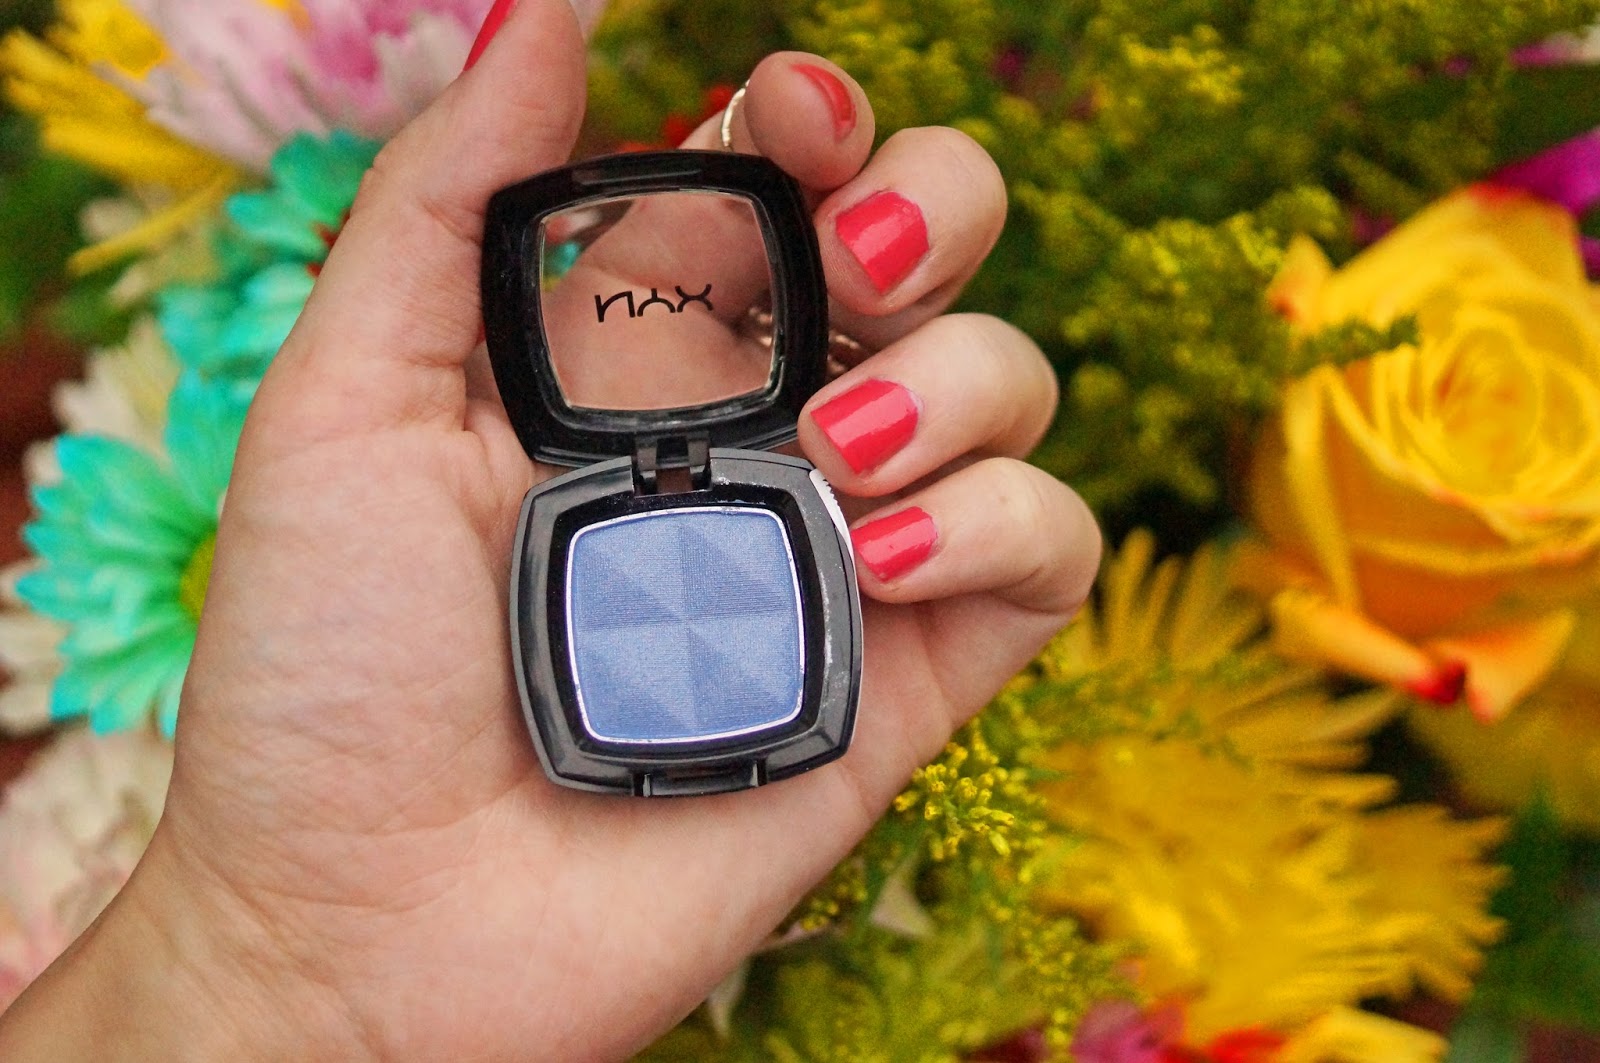 This pretty lavender eyeshadow by NYC is perfect for Spring